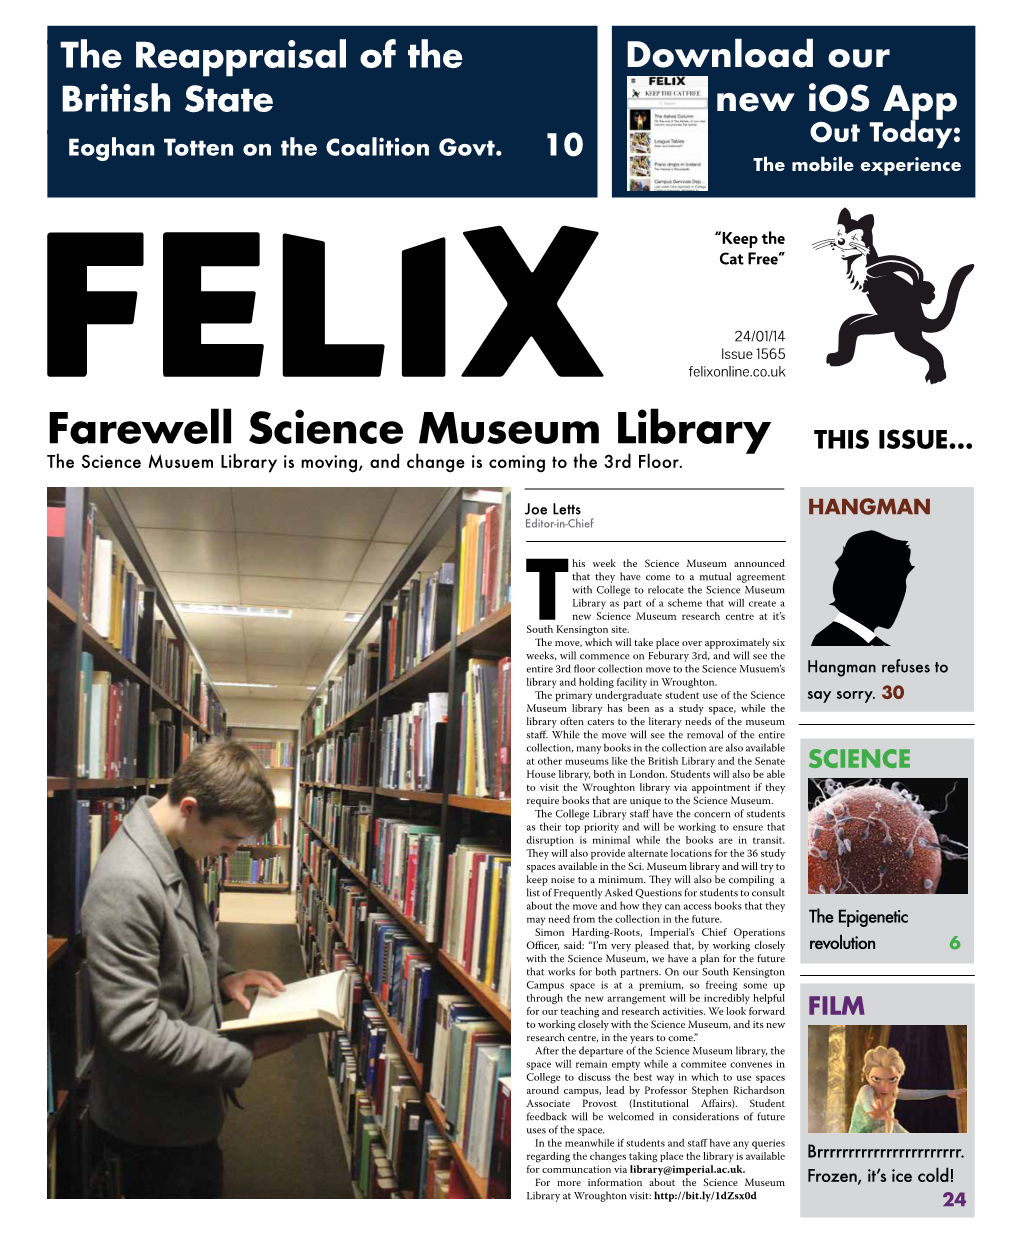 Farewell Science Museum Library THIS ISSUE